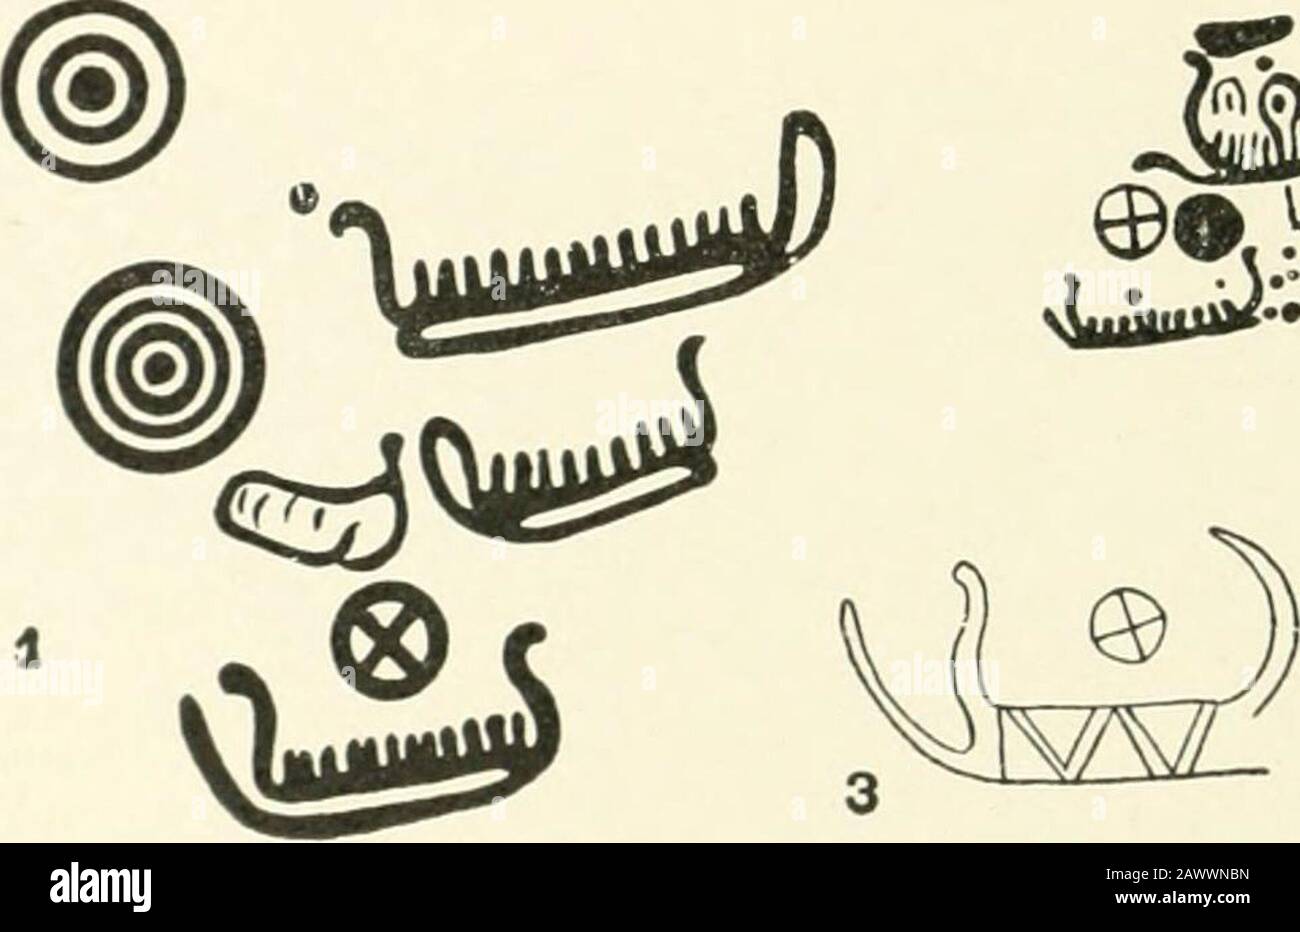 An introduction to the study of prehistoric art . lar Disks, falling into line withwhat is said hereafter on Sun worship. The boat itself isalso a solar symbol. These designs have been cited as evi-dence of the existence in the Bronze Age of the myth of theSun traversing the ocean when at night the world is left in ^ Les Temps Prchistoiiques eft Siiede, par O. Montelius, transl. byS. Reinach, chap. 11., p. 125, Fig. 176. 222 PREHISTORIC ART darkness, a myth naturally appealing to a people livingon coasts facintj the settino sun.^ Similar boat designs are to be seen incised on rocksurfaces in s Stock Photo